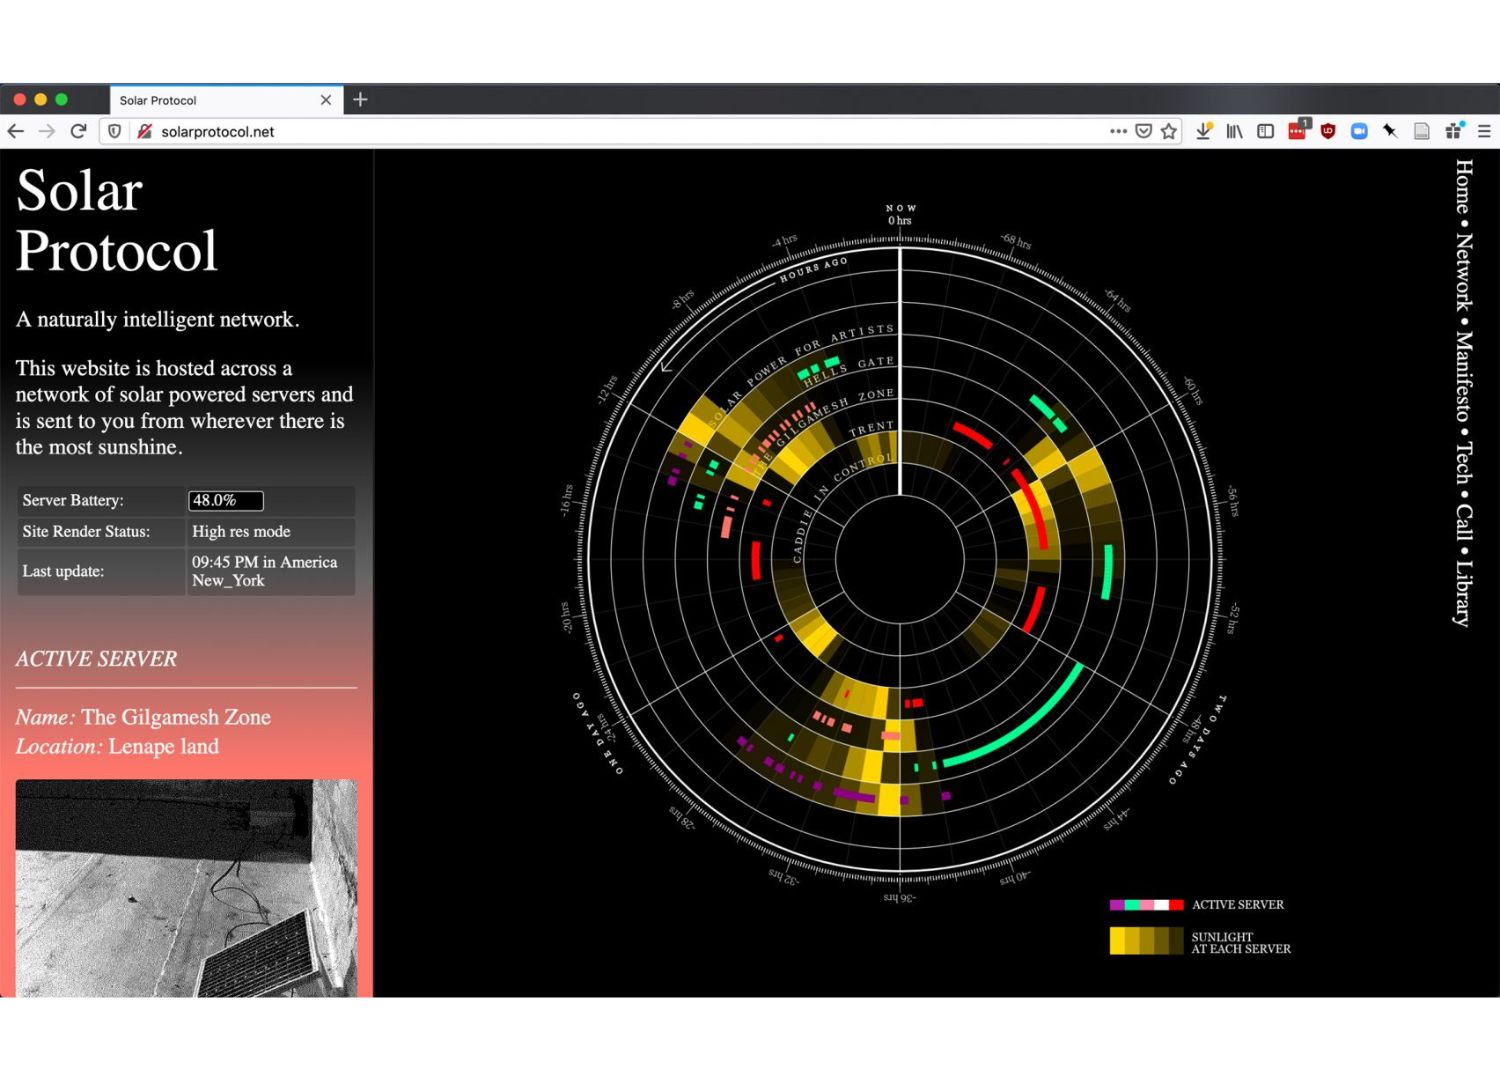 Solar Protocol by Tega Brain, Alex Nathanson and Benedetta Piantella / Innovative digital design and data visualizations that shed light on global warming